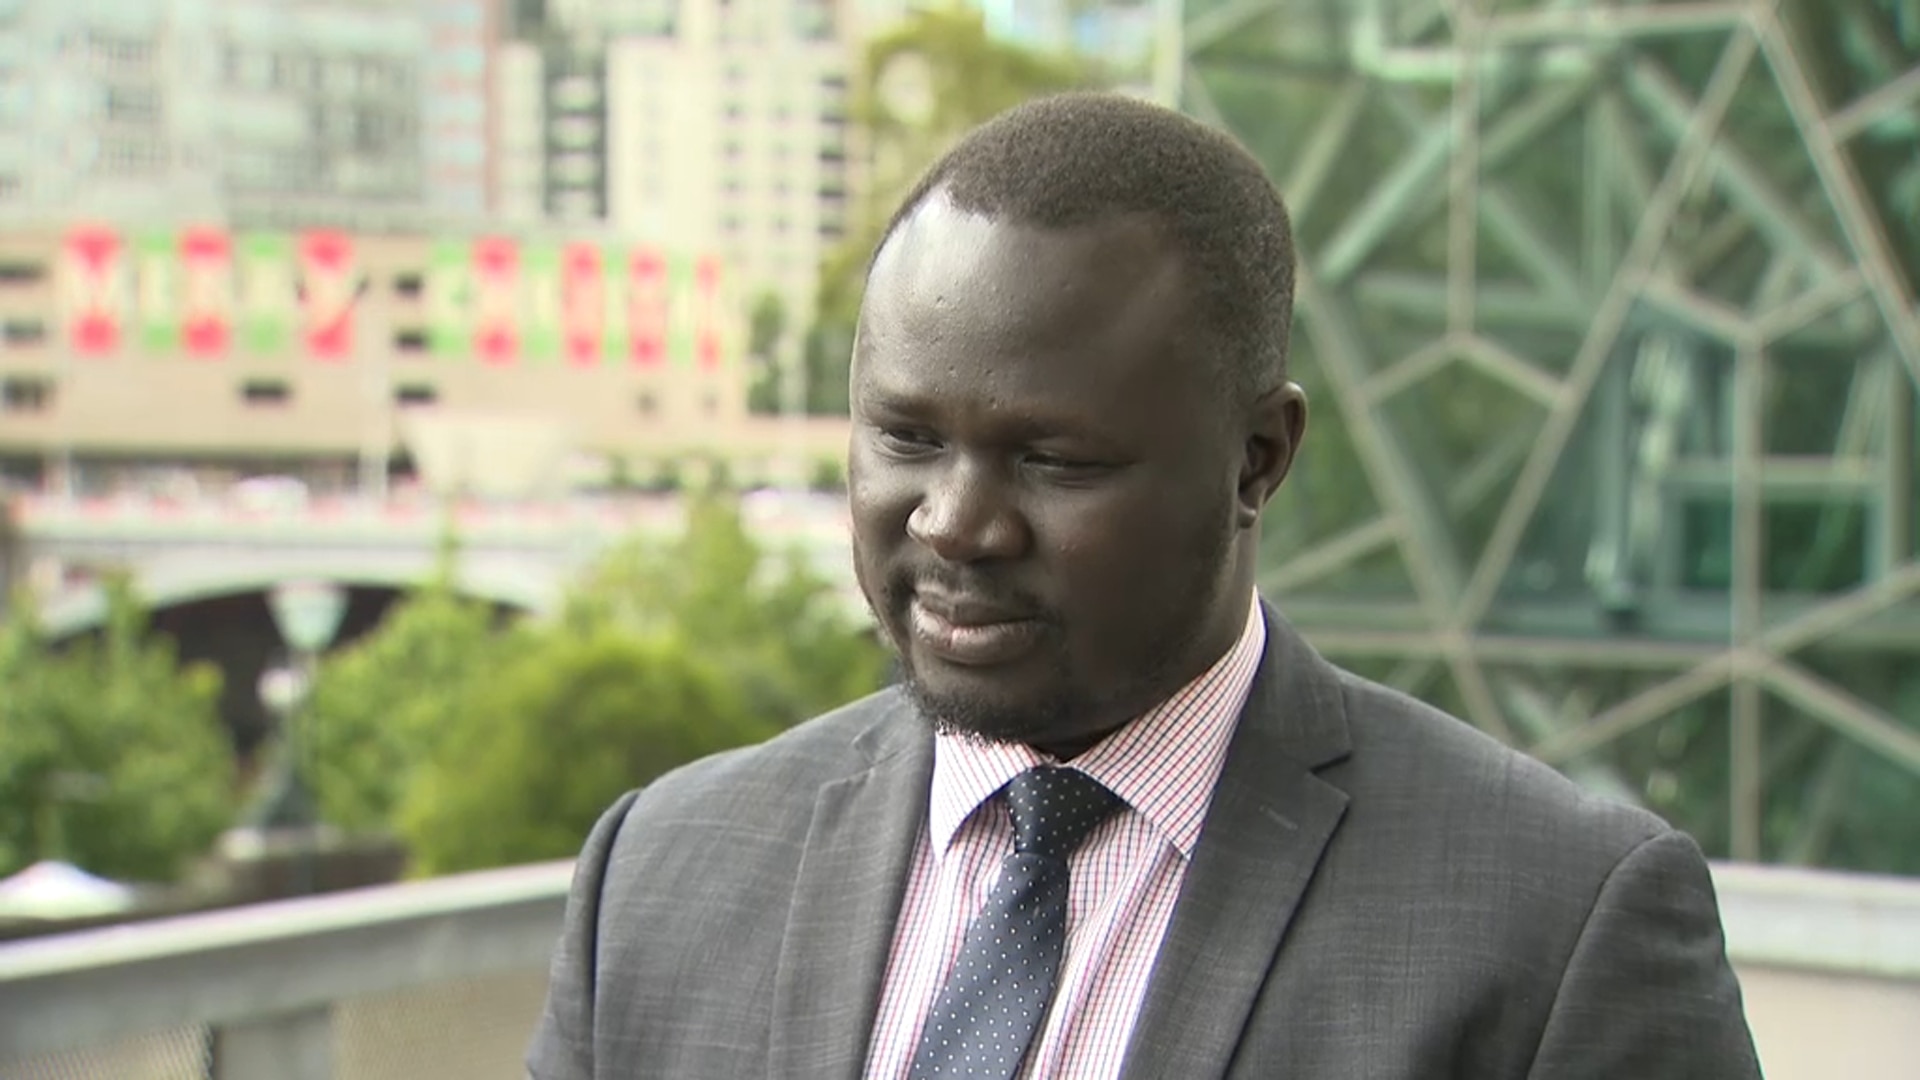 South Sudanese-Australian lawyer Maker Mayek said he was outraged over the incident.